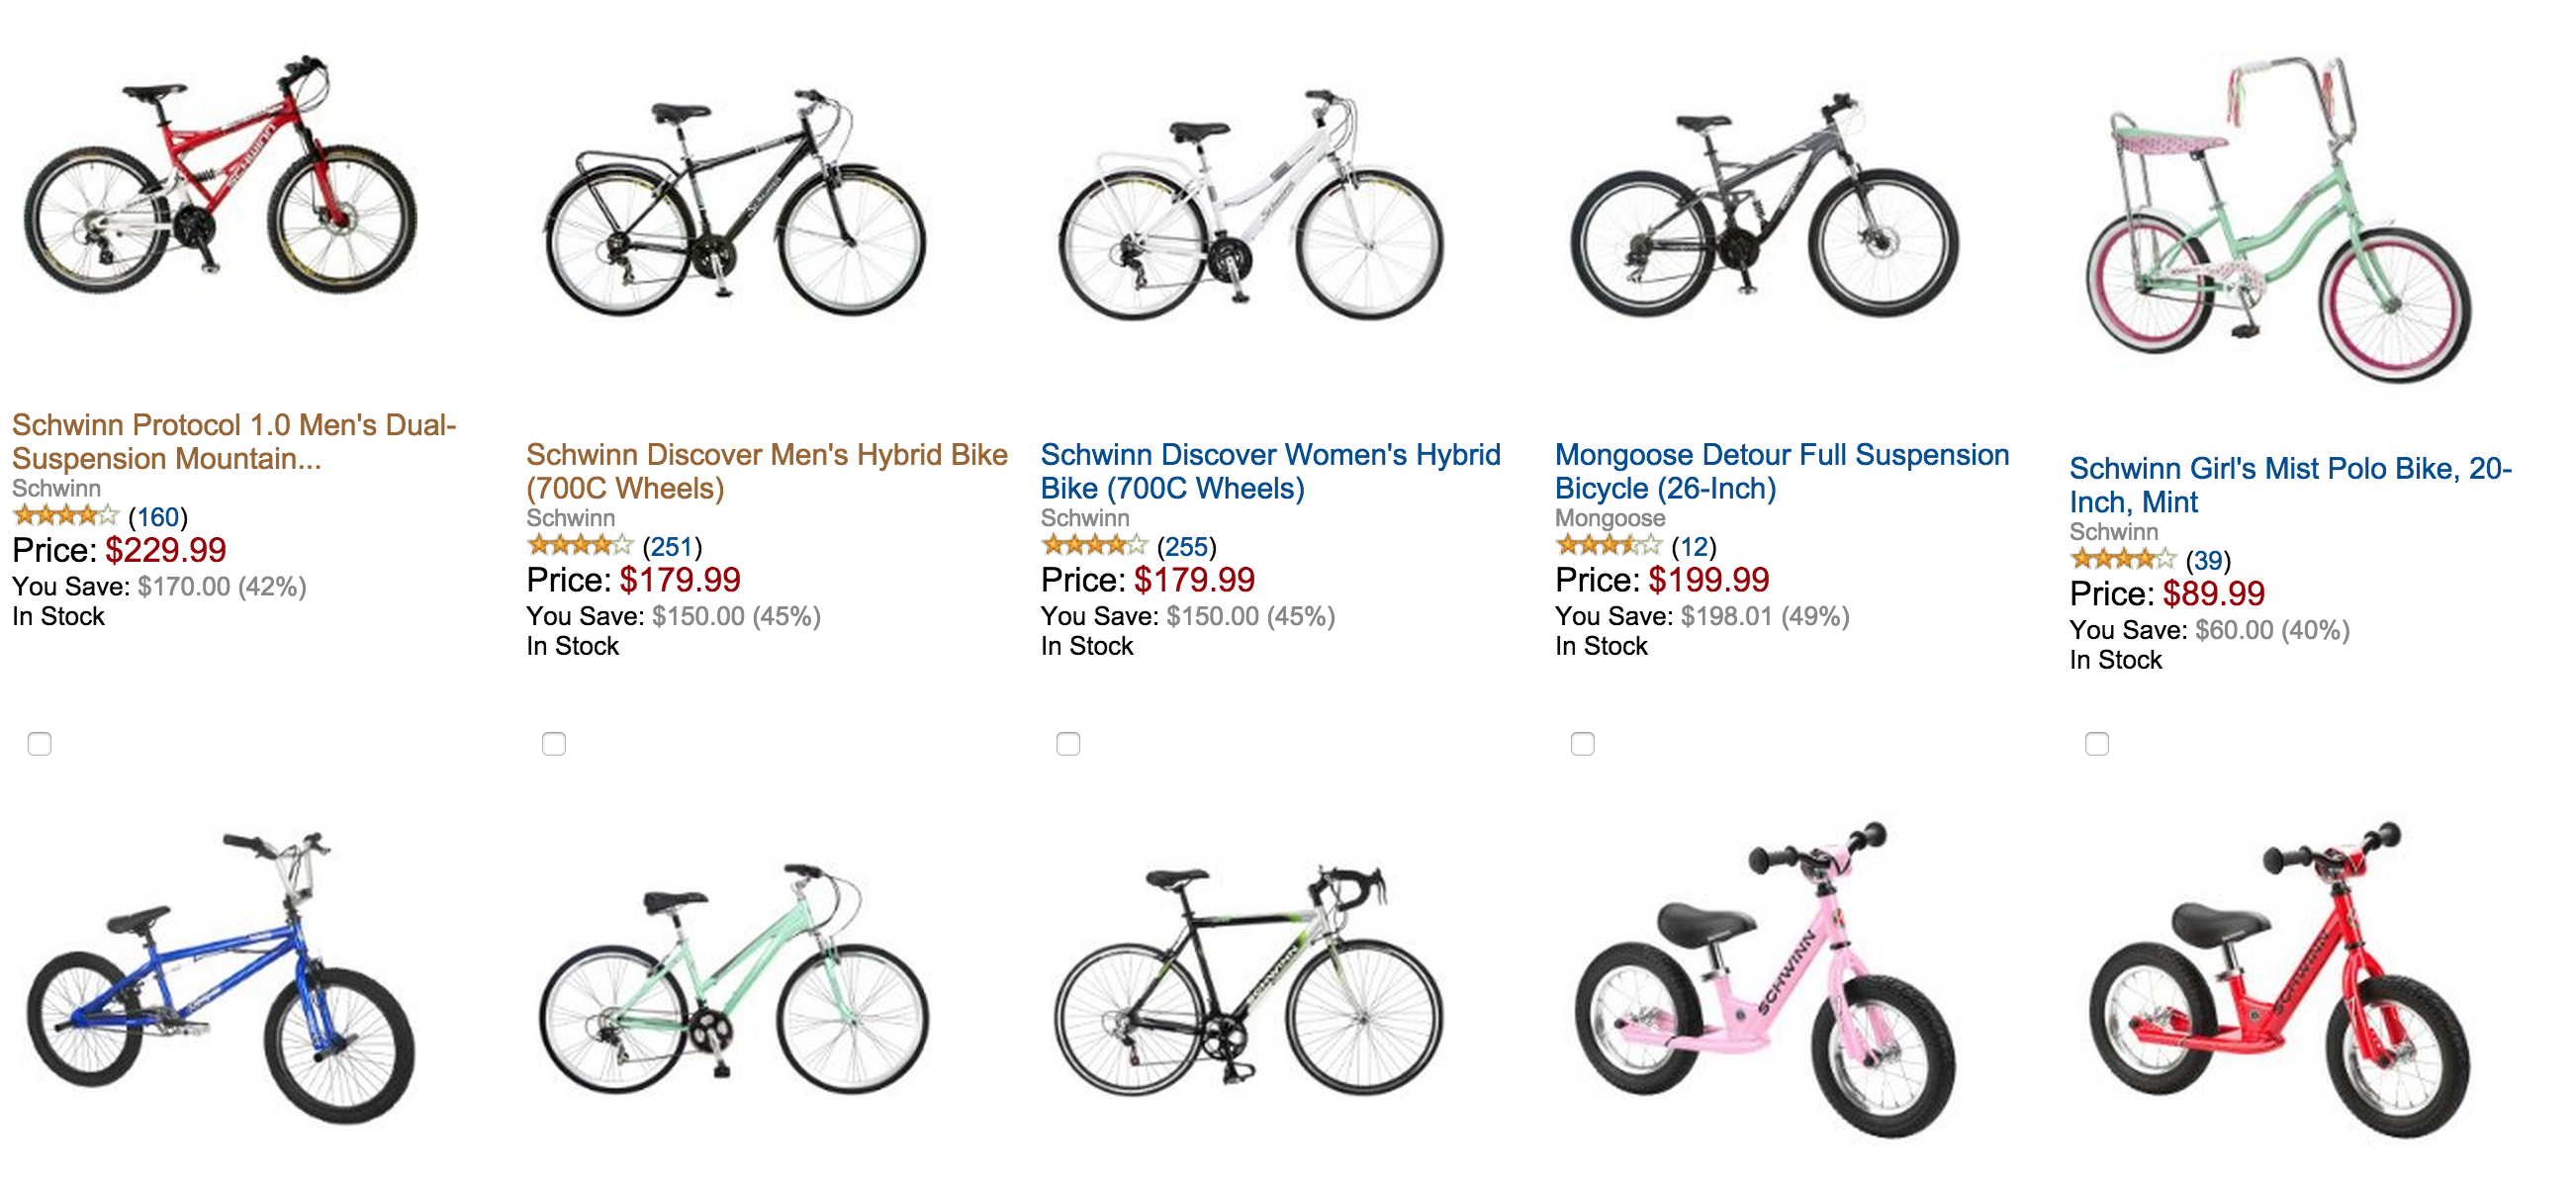 Bicycle Sale At Amazon - Up To 40% Off Retail